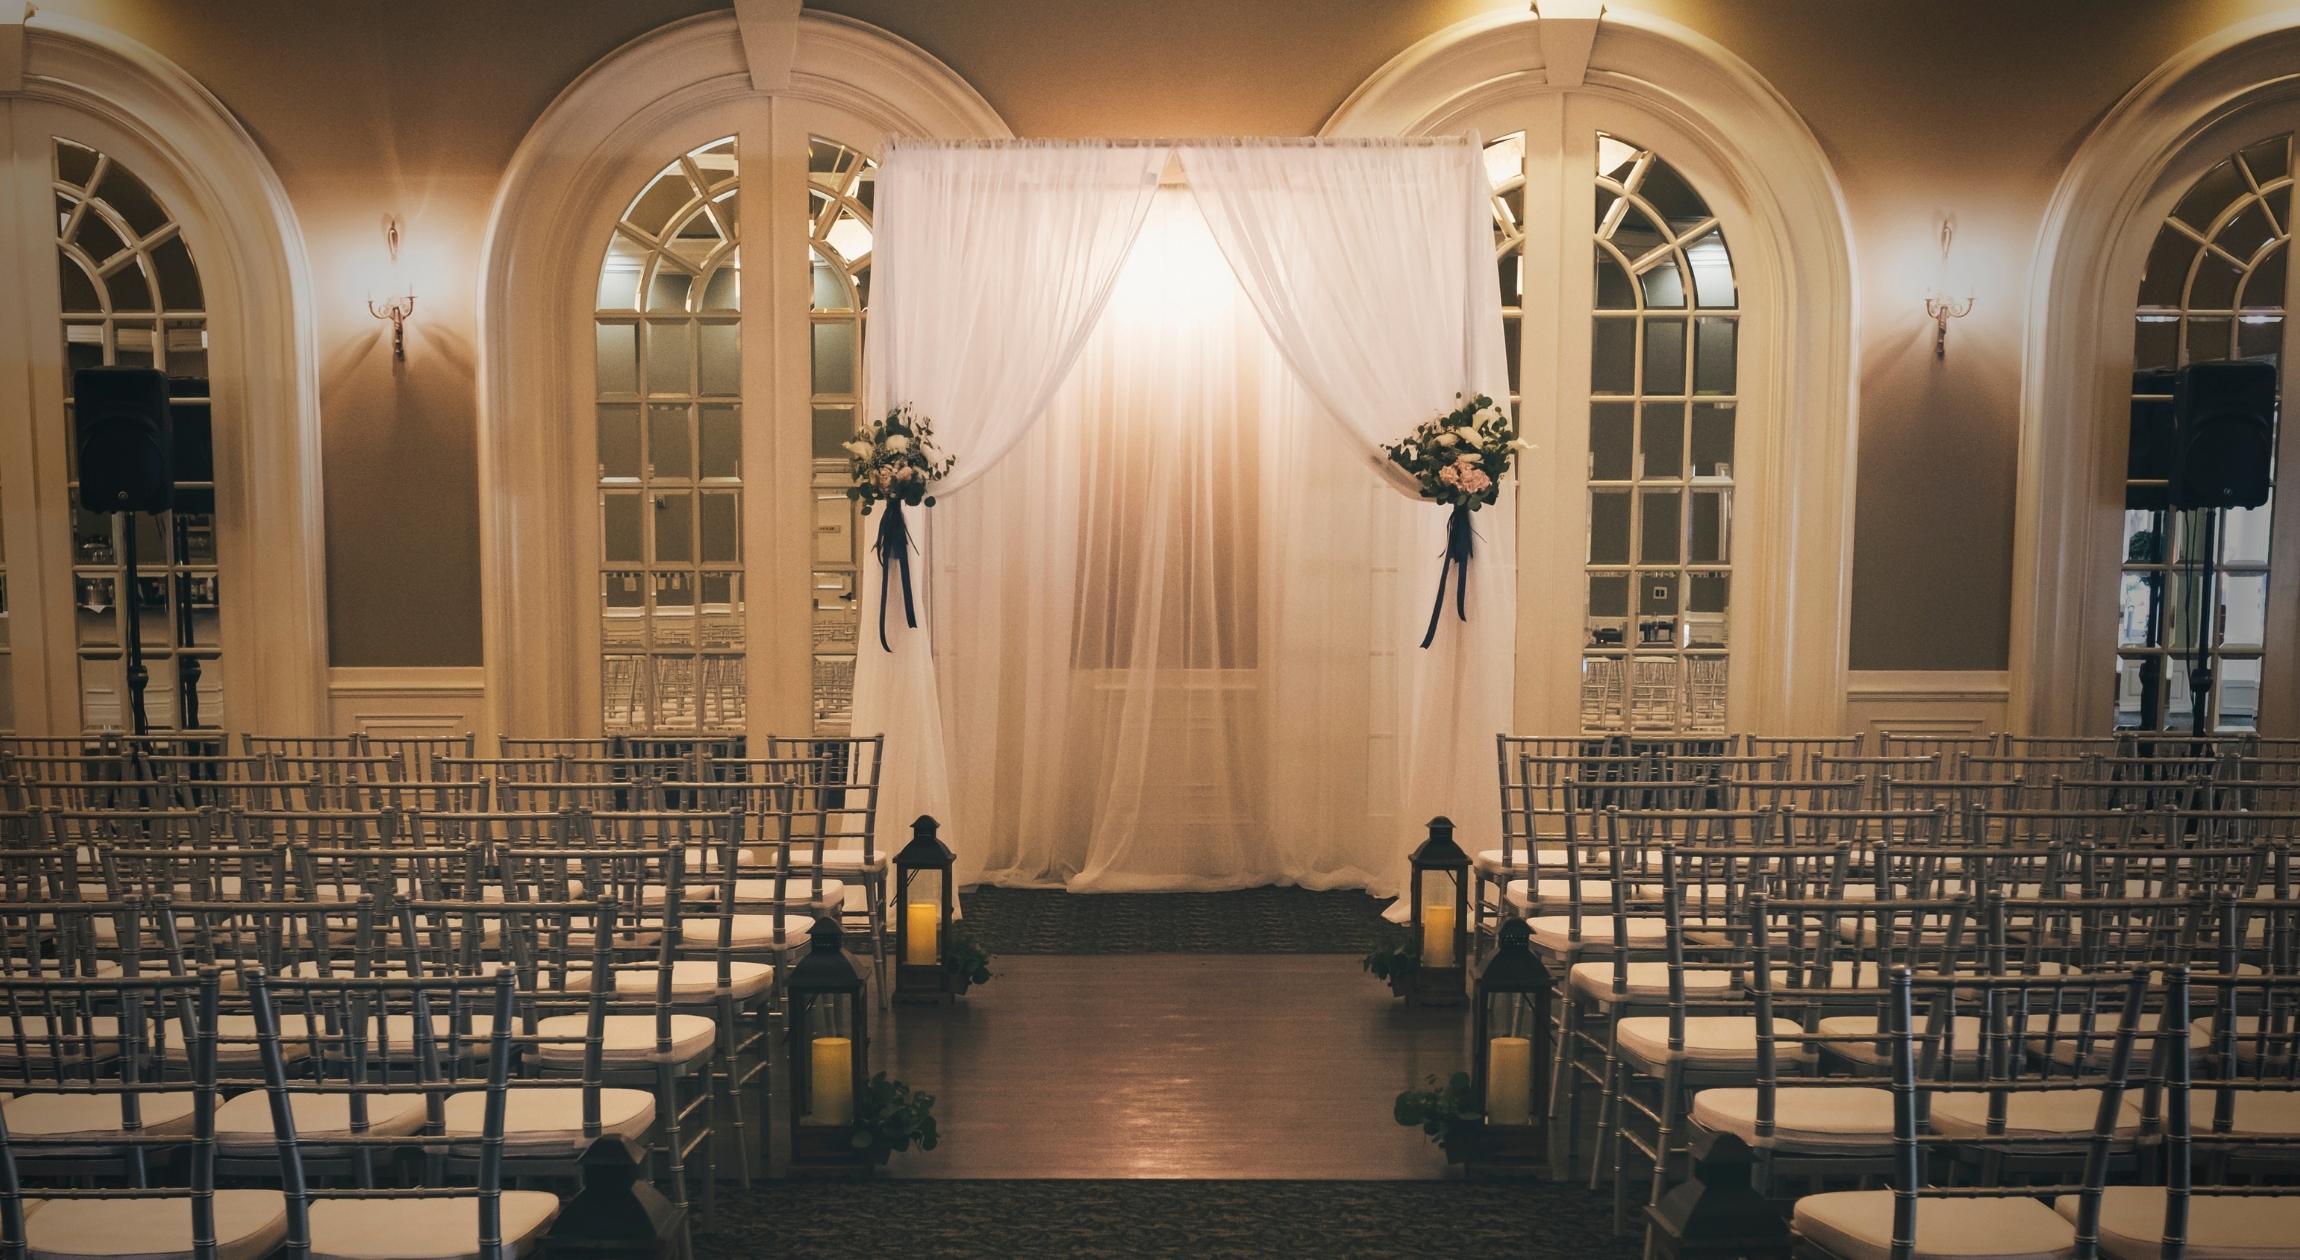 A low lit room with chairs and lights and a draped altar in the center